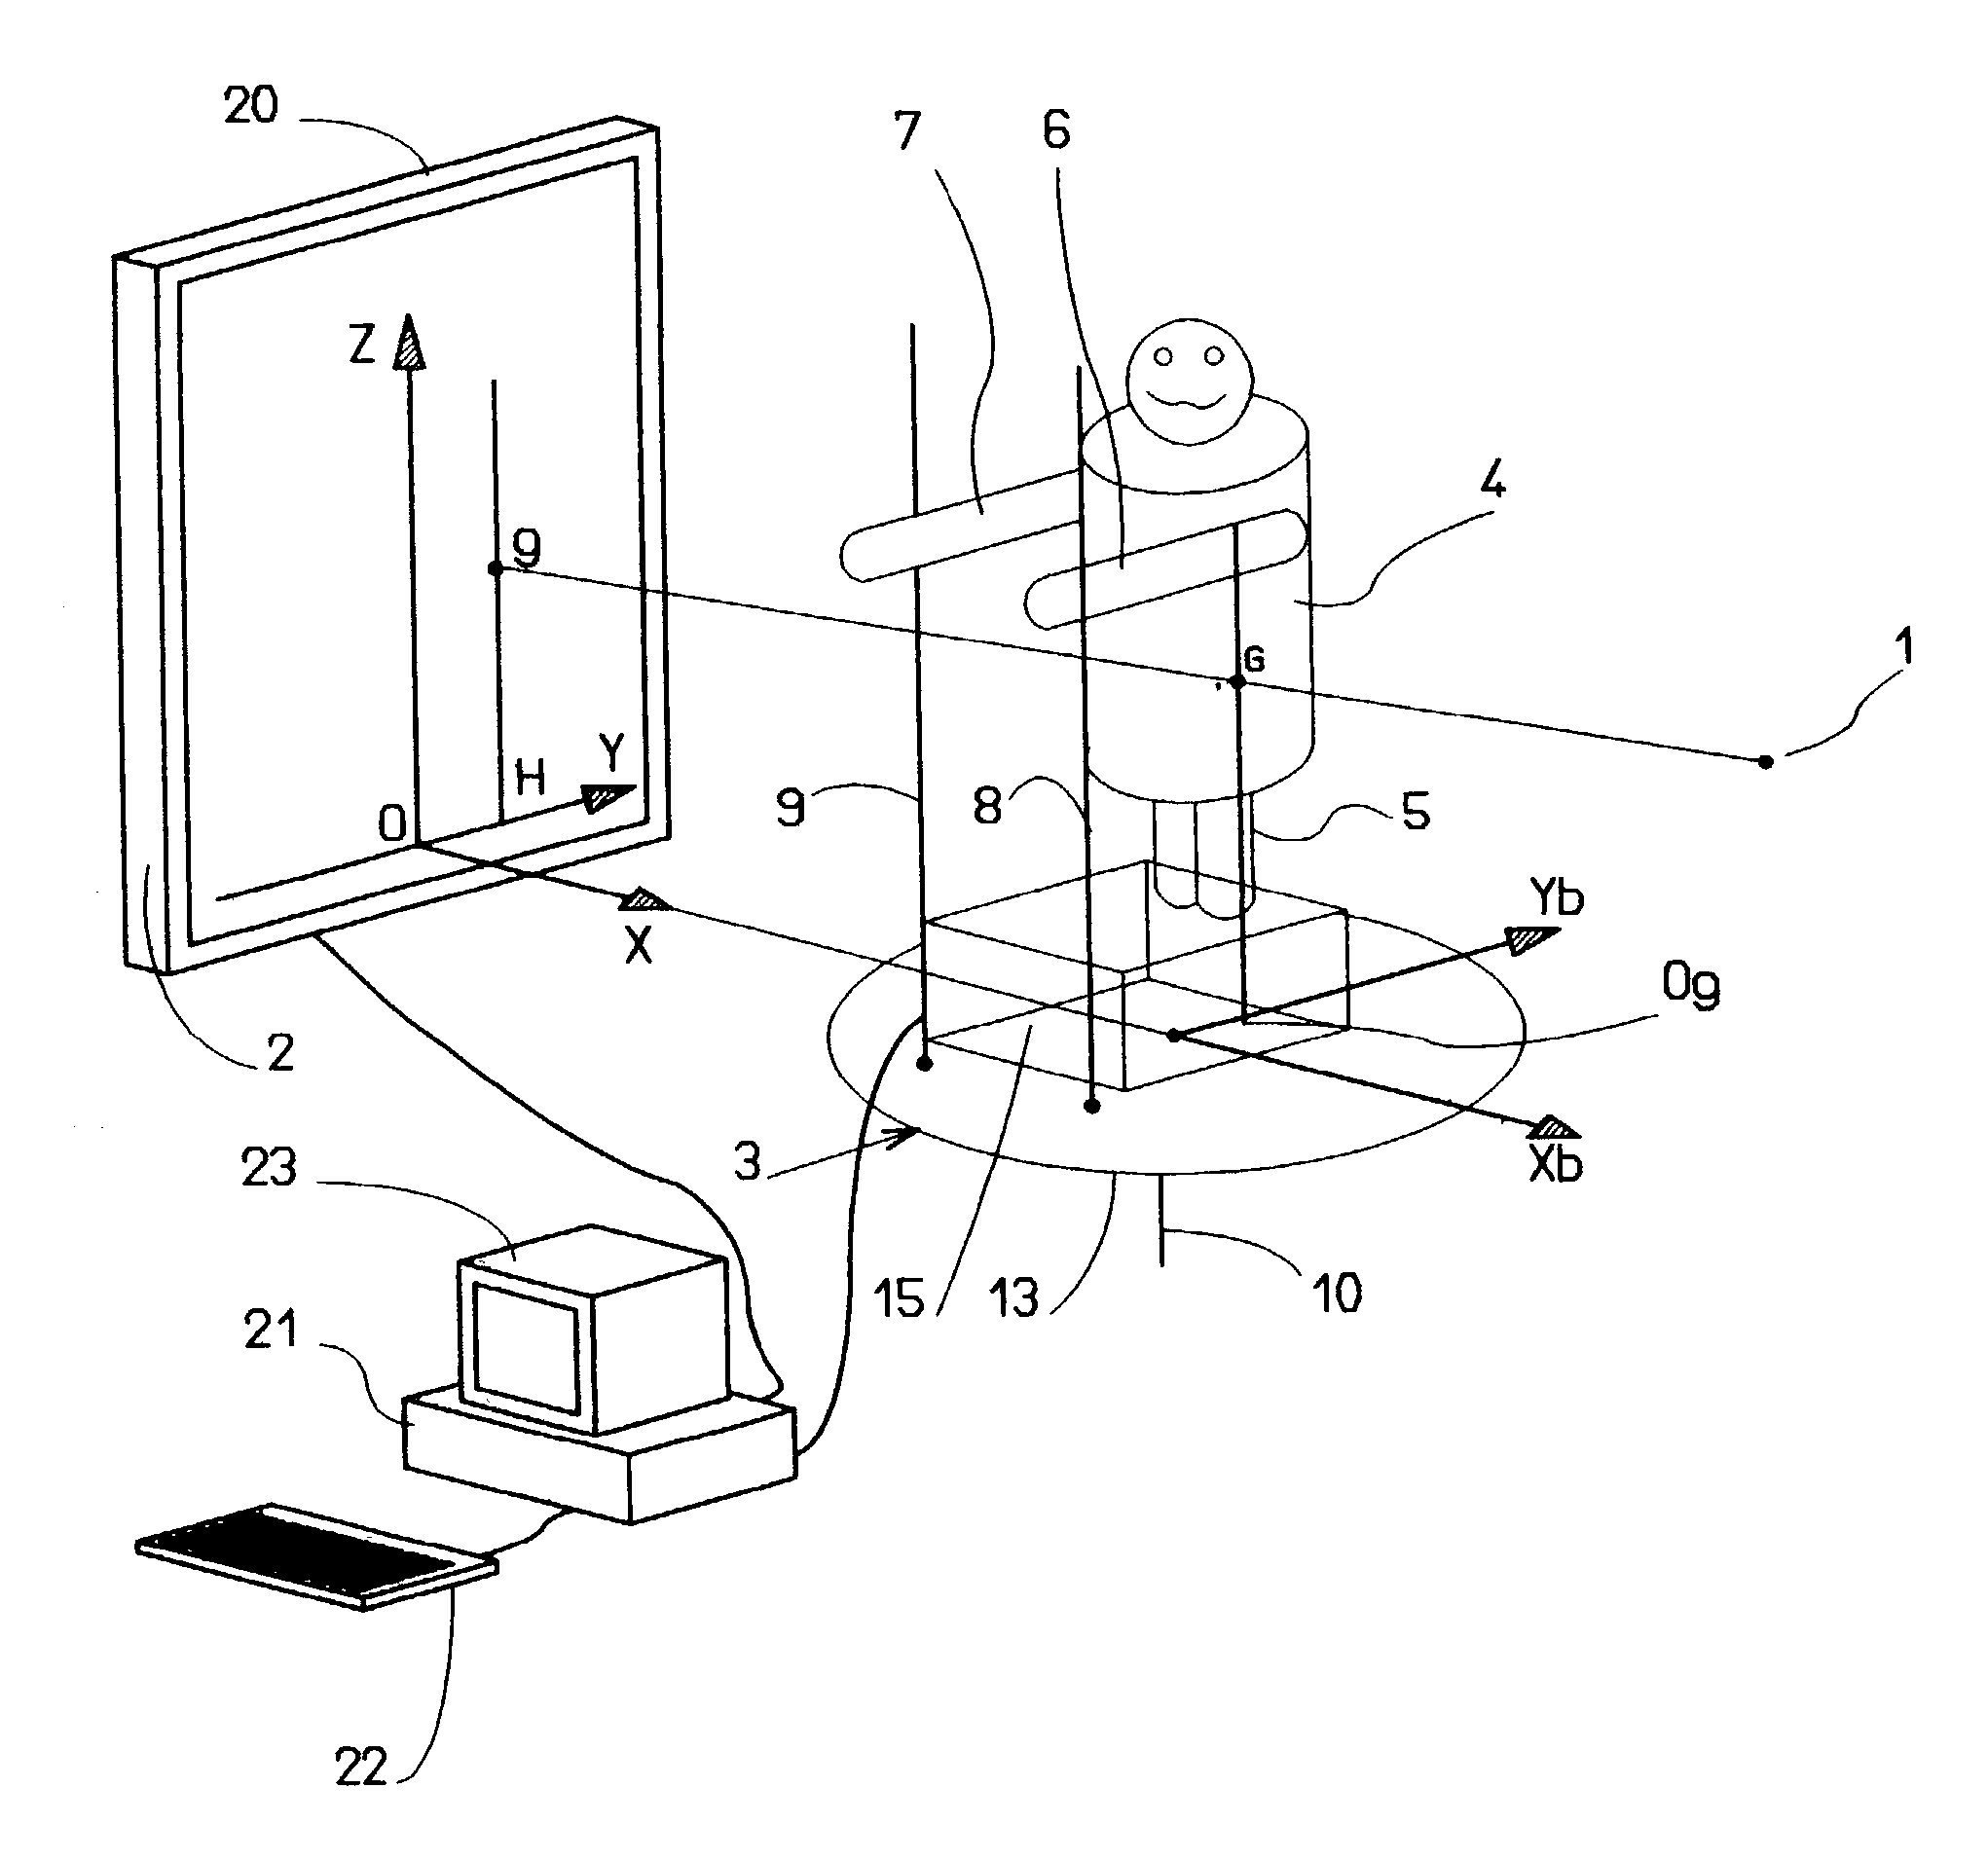 Device for evaluating a position of balance for the human body